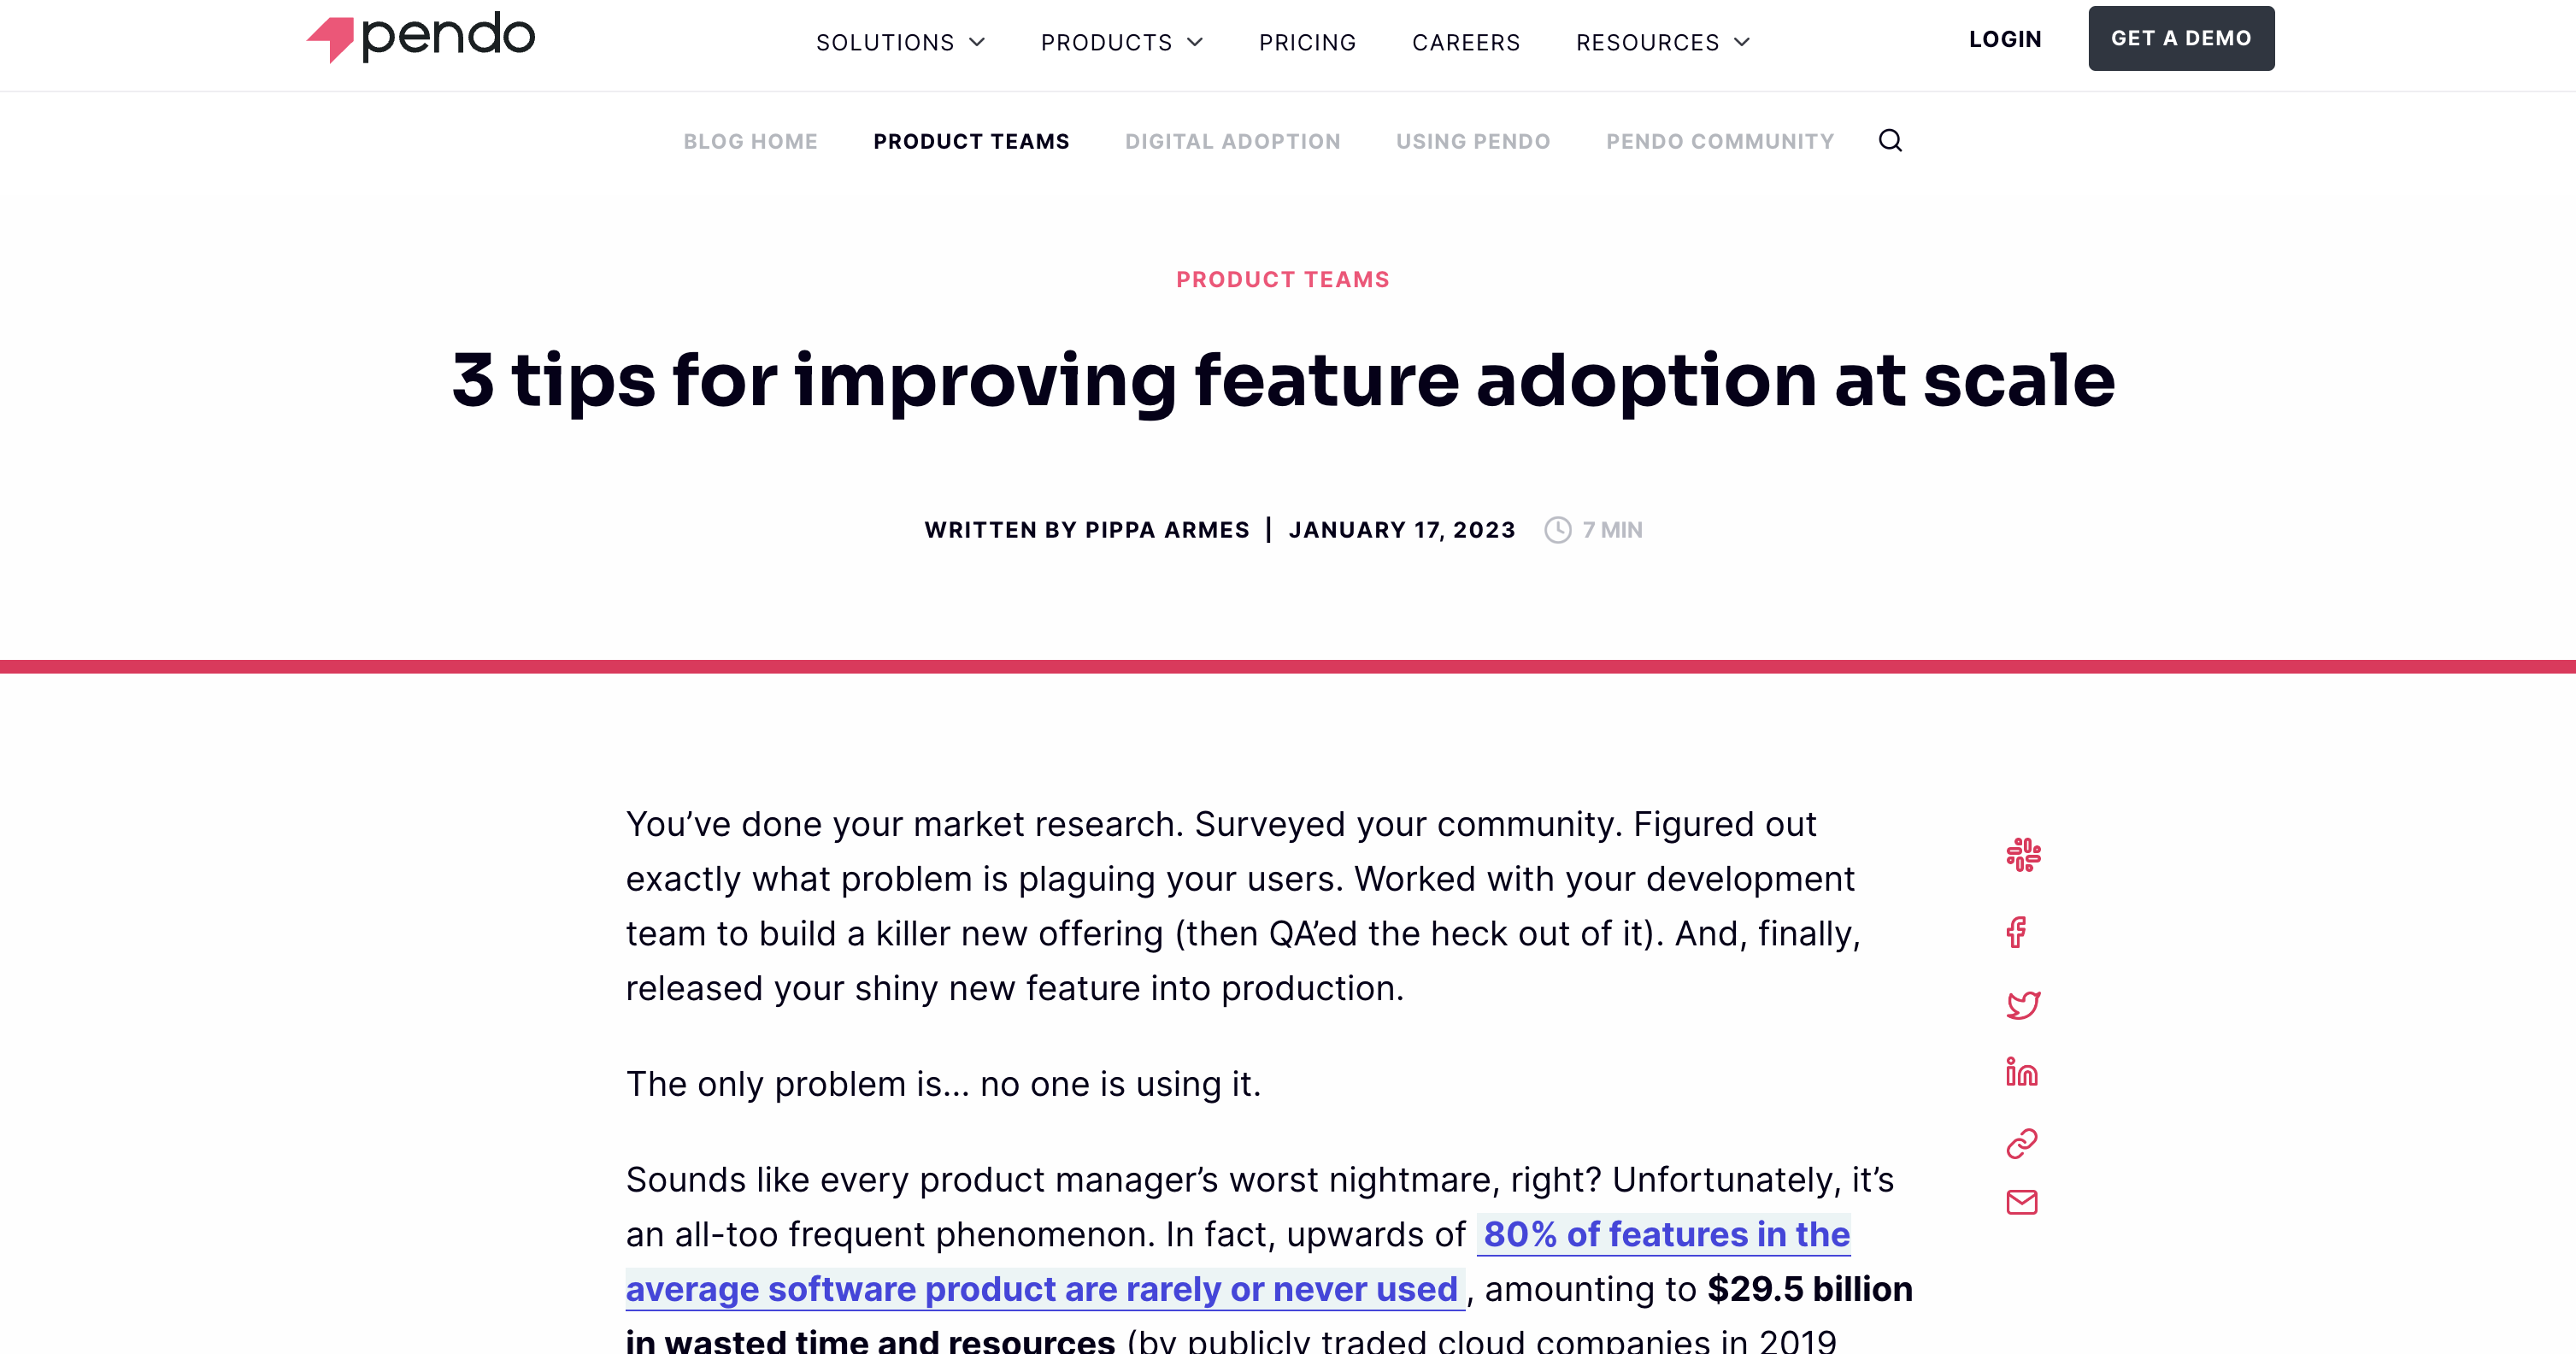 3 tips for improving feature adoption at scale